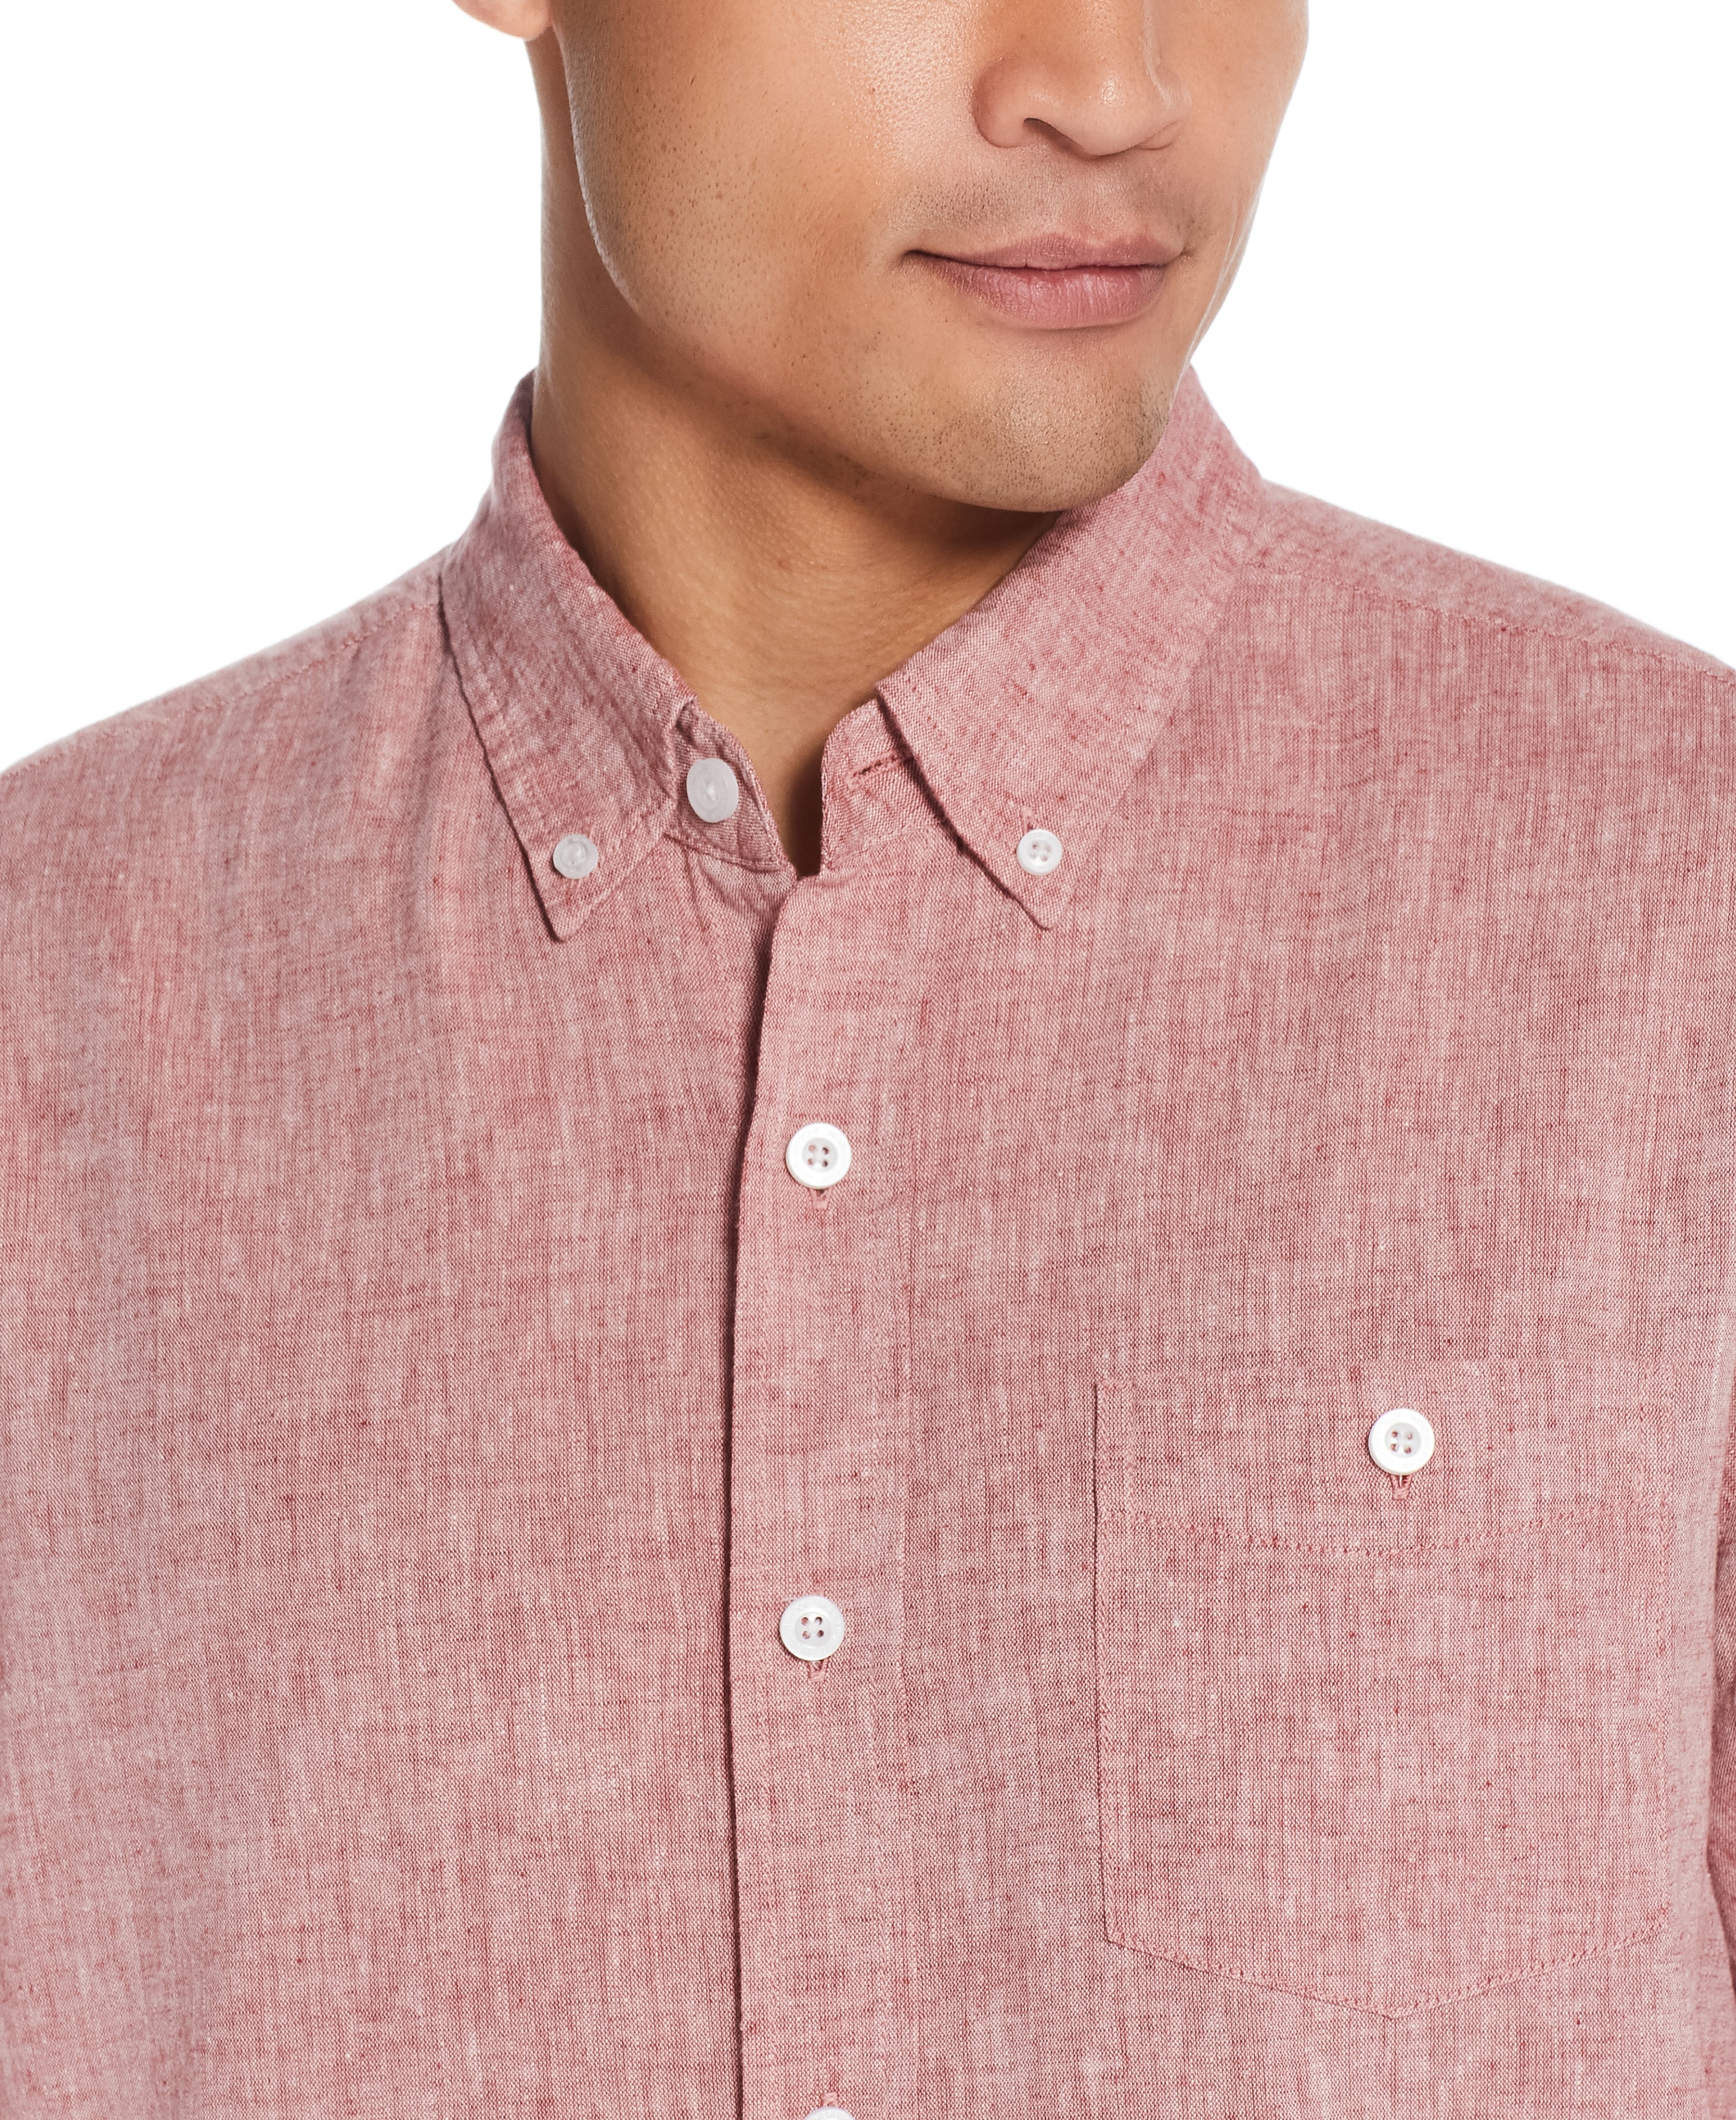 Long Sleeve Linen Cotton Shirt in Chili Oil